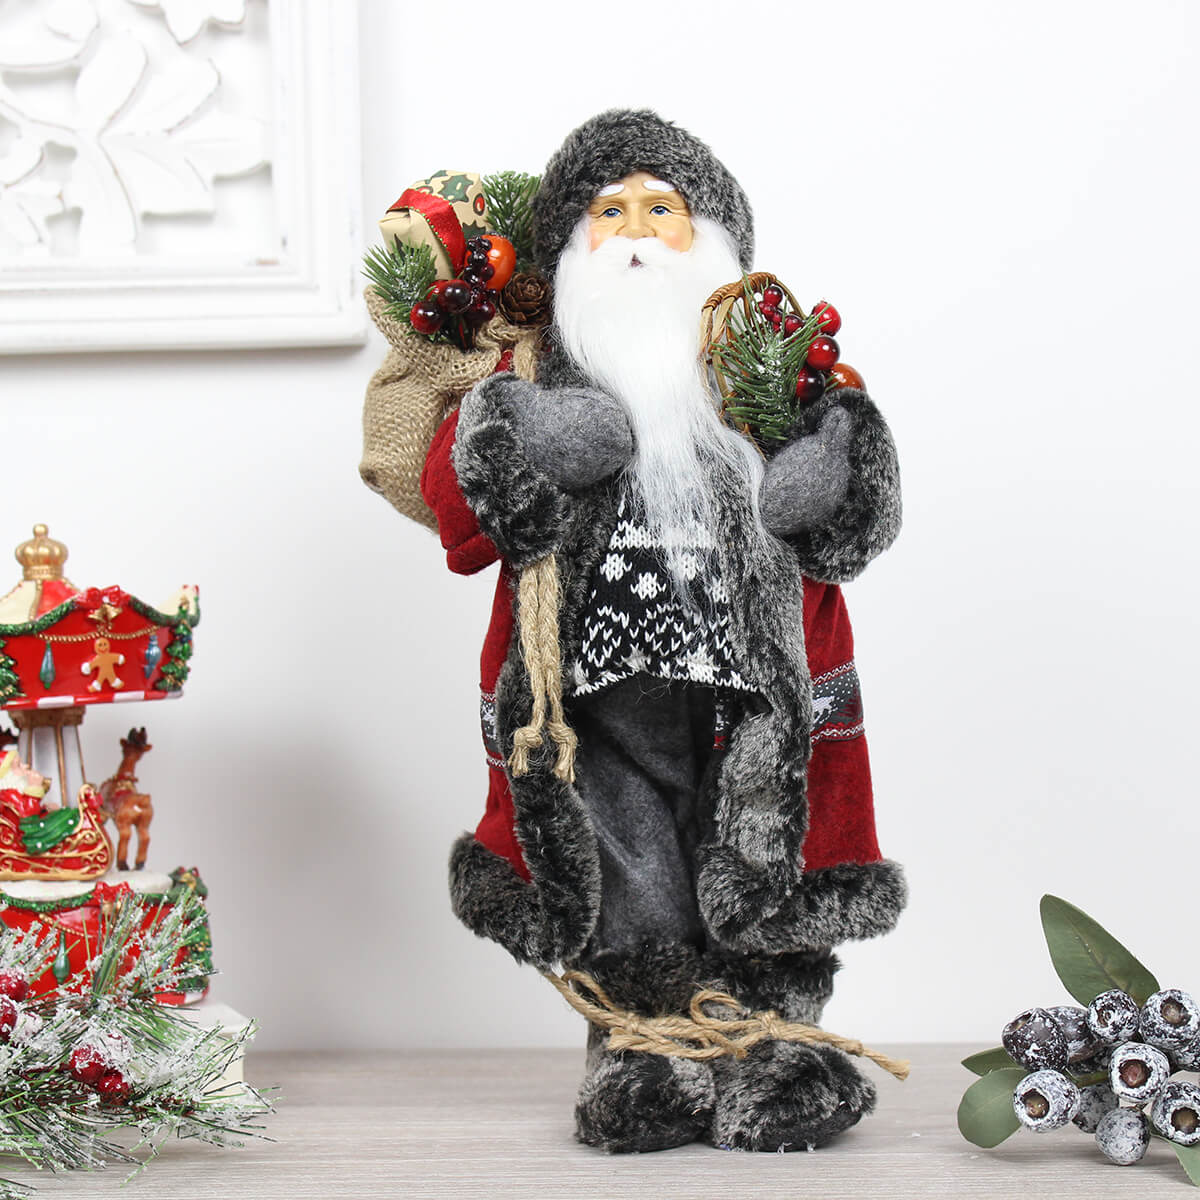 Plush Standing Santa Ornament with Knitted Jumper & Fur Coat